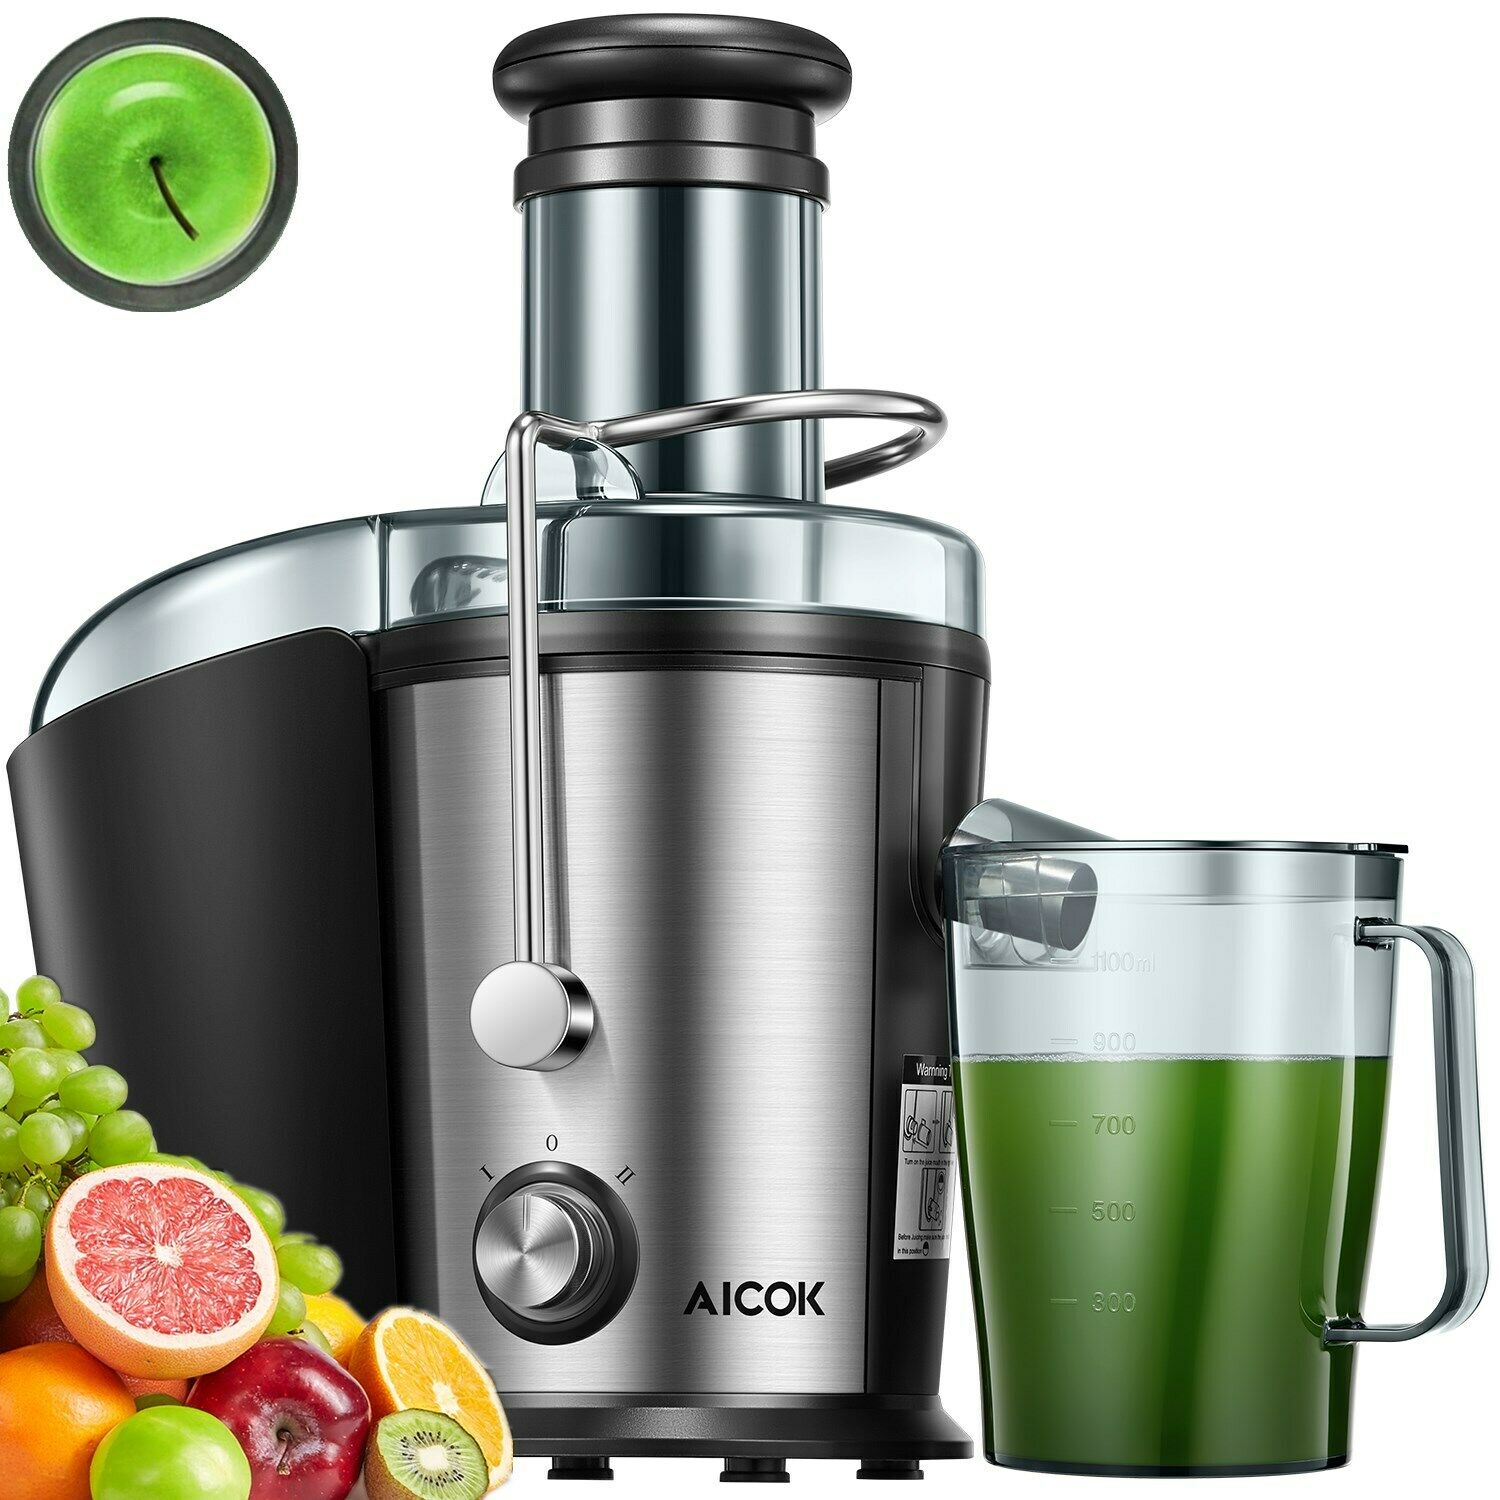 Juicer, Aicok 800W Juice Extractor, Stainless Steel Centrifugal Juicer Machine